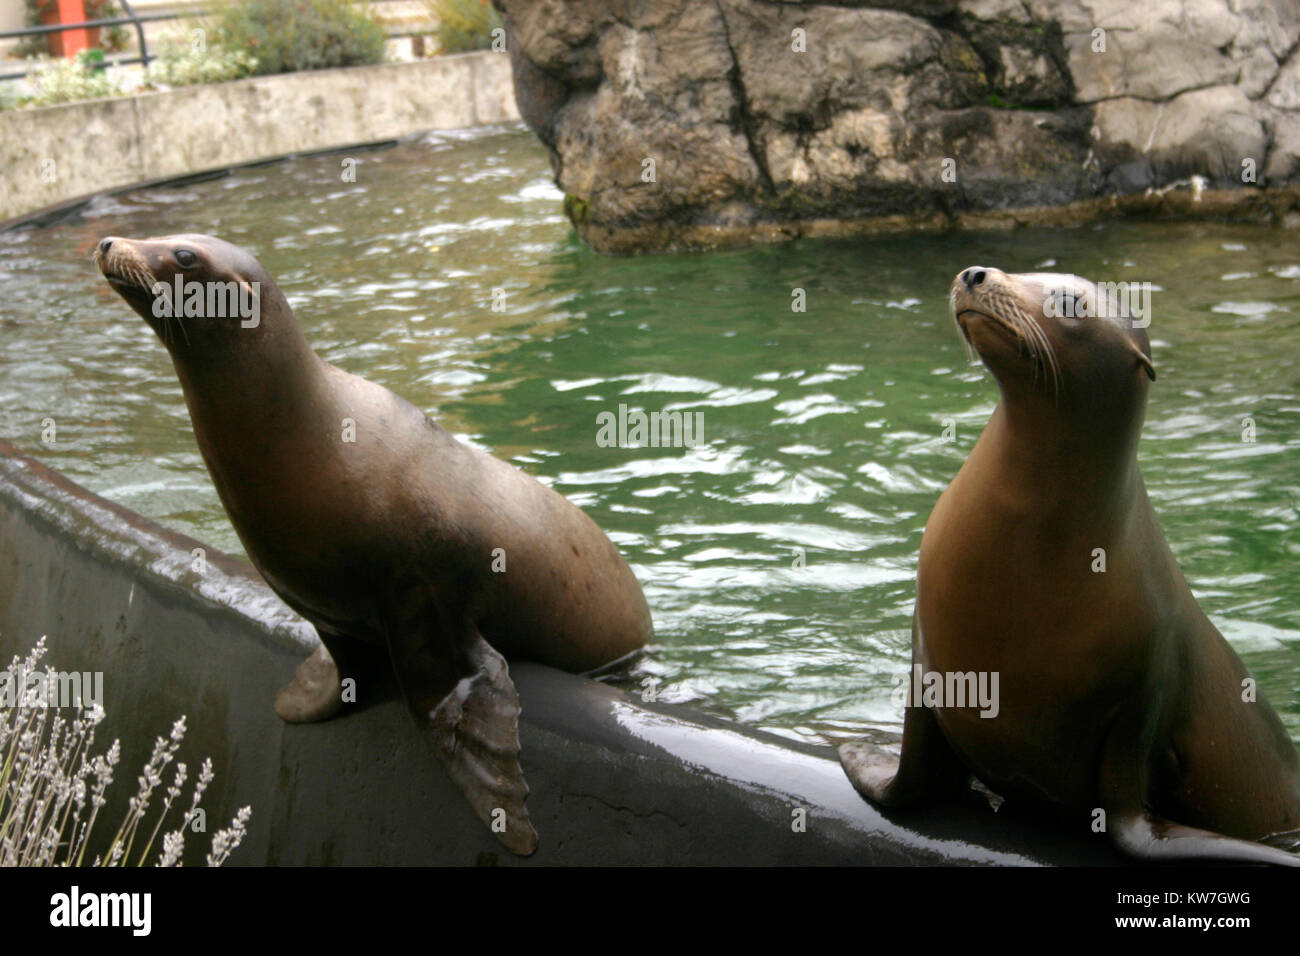 Sea lions trained to perform tricks at the ZOO Stock Photo